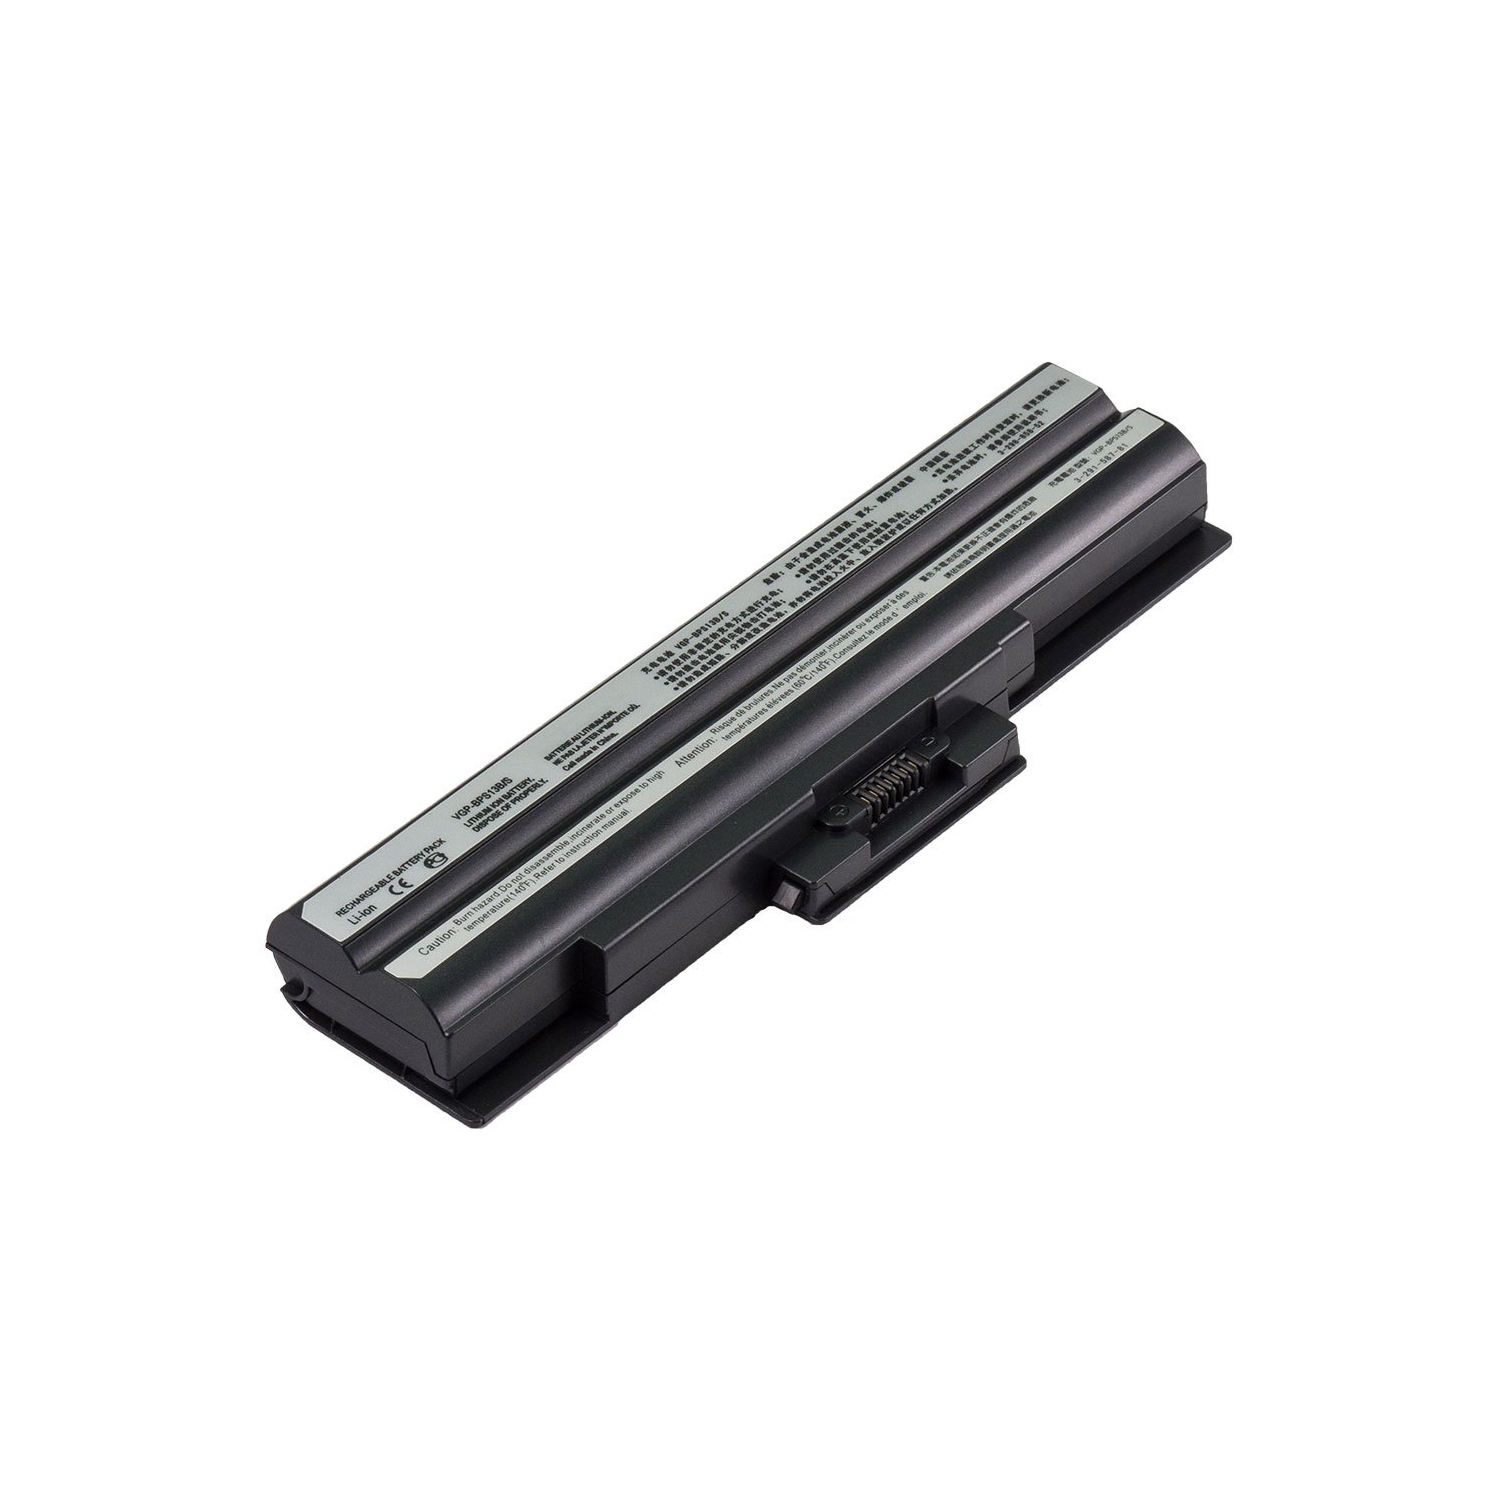 Laptop Battery Replacement for Sony VAIO VGN-SR390PDB, VGP-BPS13, VGP-BPS13/S, VGP-BPS13A/Q, VGP-BPS13B/B, VGP-BSP13/S